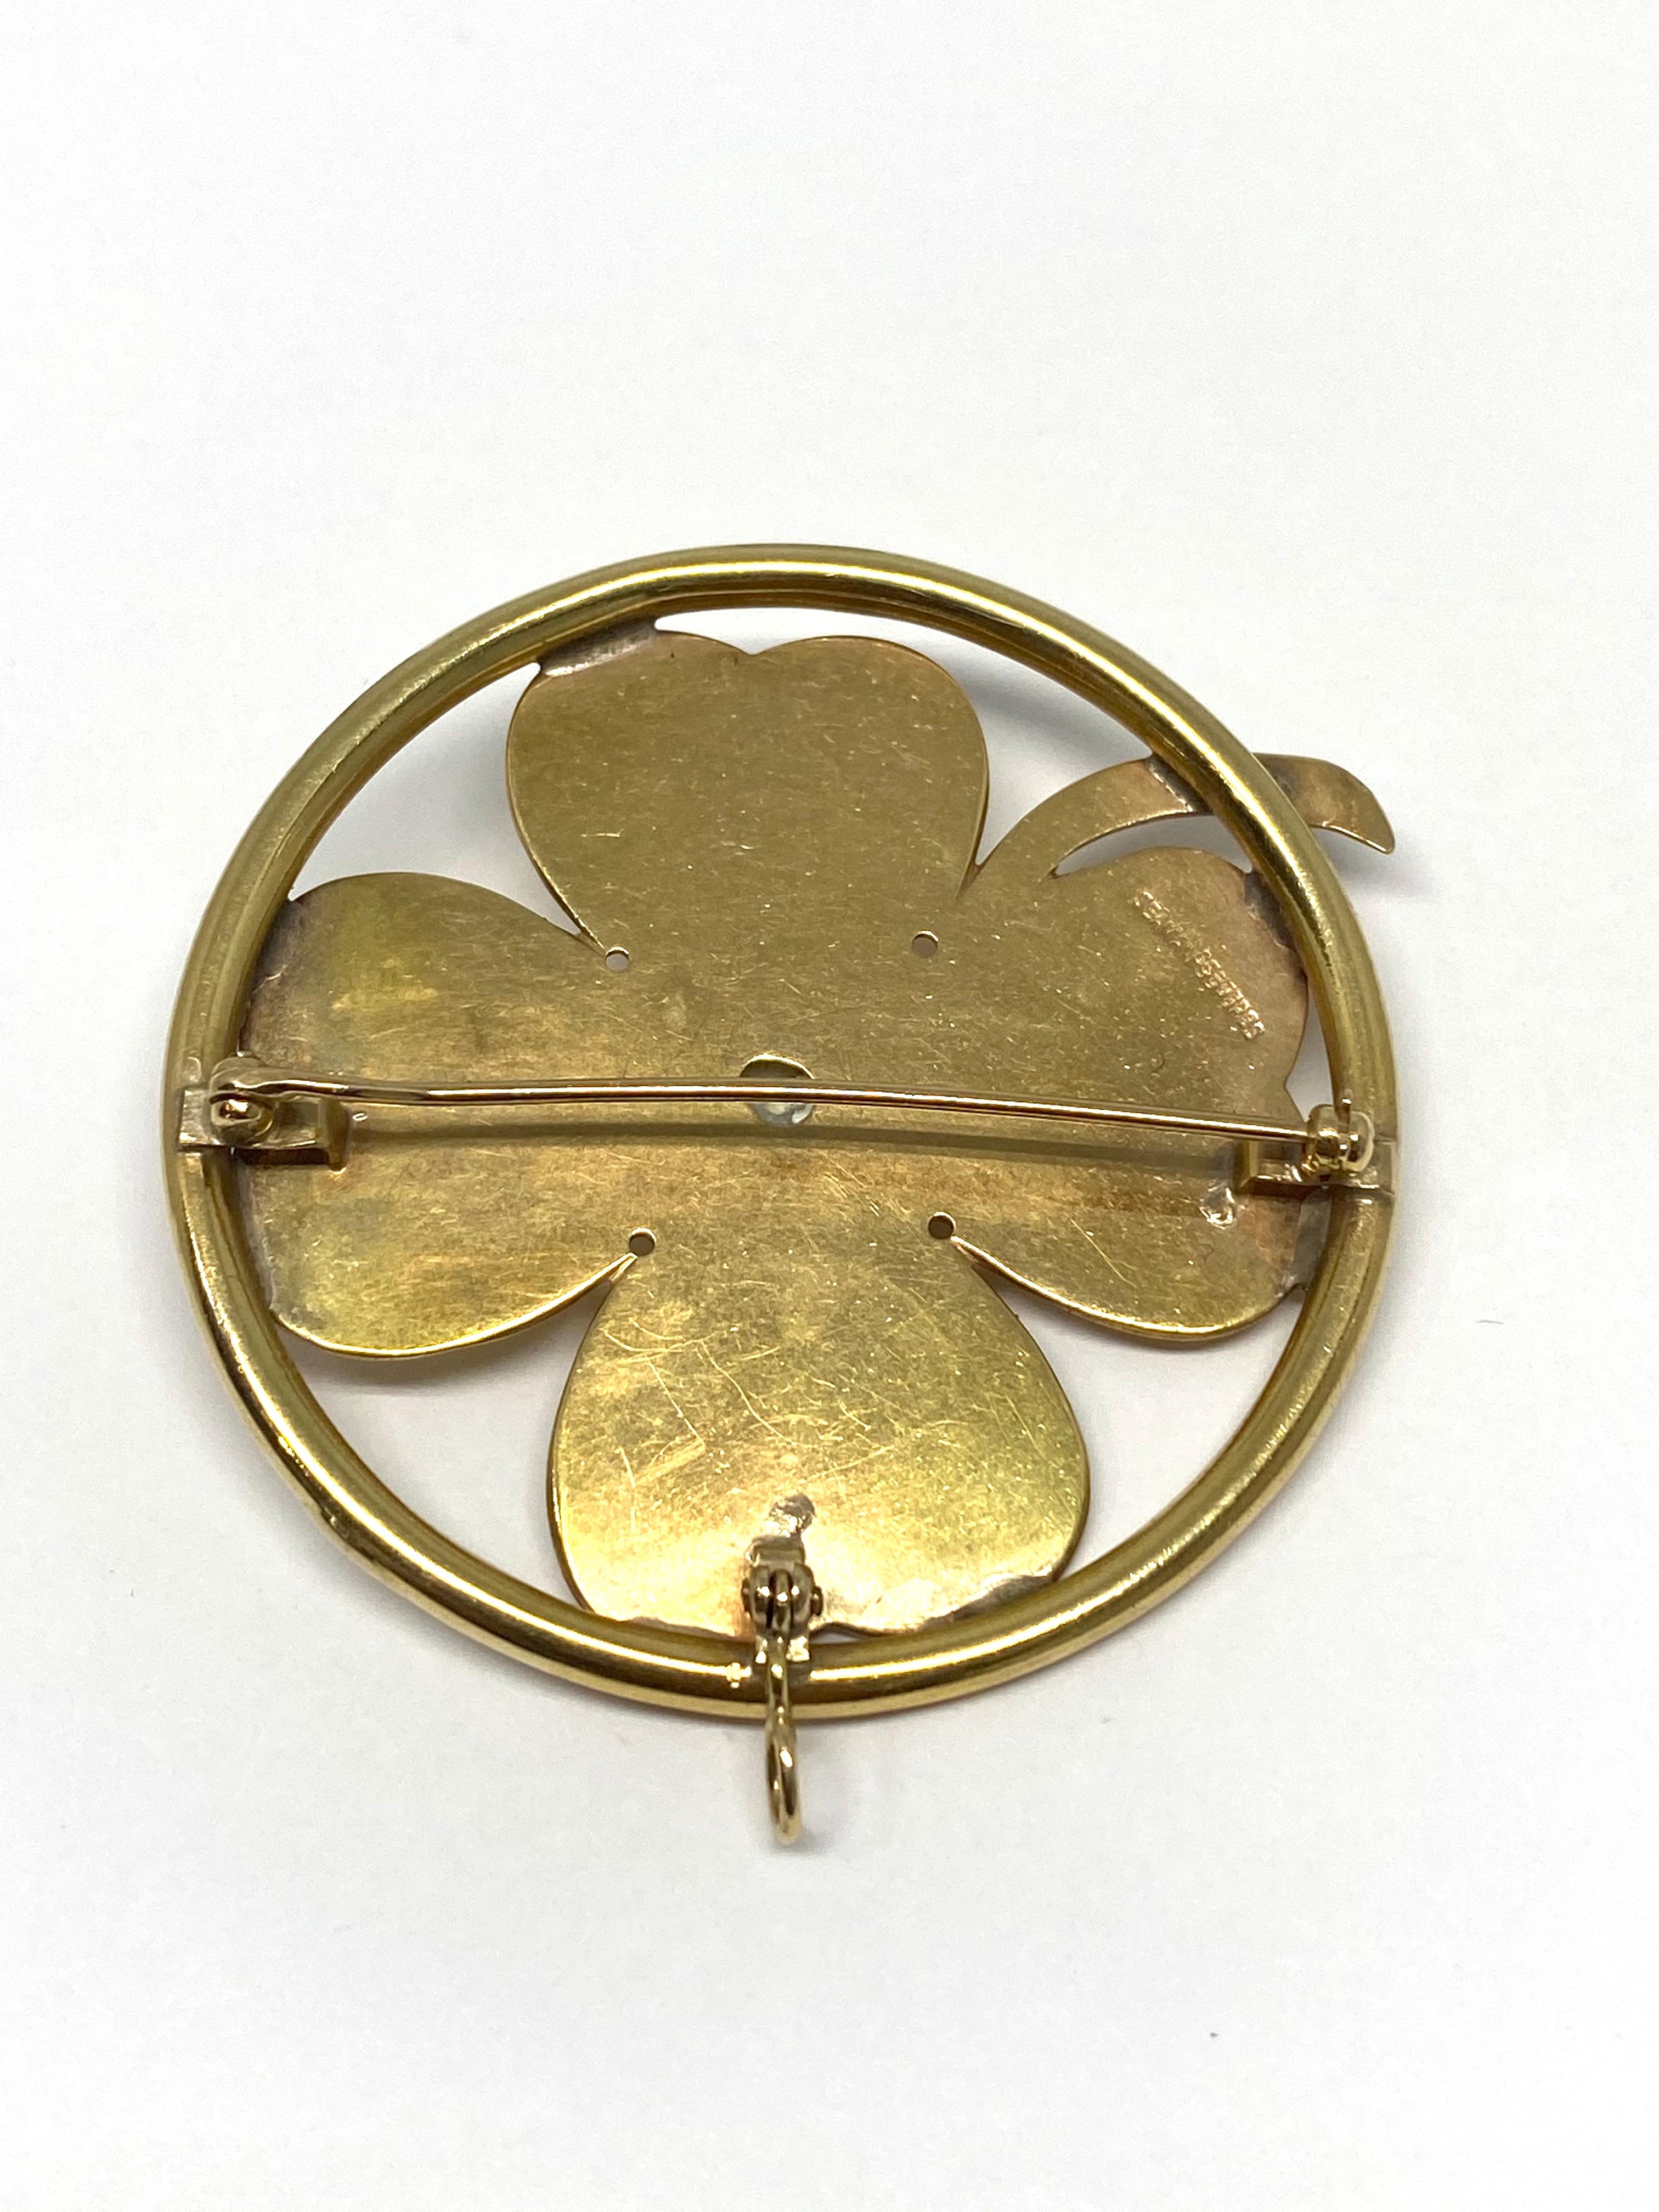 Product details;
Circa 1950's.
Featuring 14K yellow gold and mobe pear (14mm diameter) detail in the middle, clover motif. 
From the RETRO period. 
2 in 1 brooch and pendant. 
Signed SEAMAN SCHEPPS on the back.